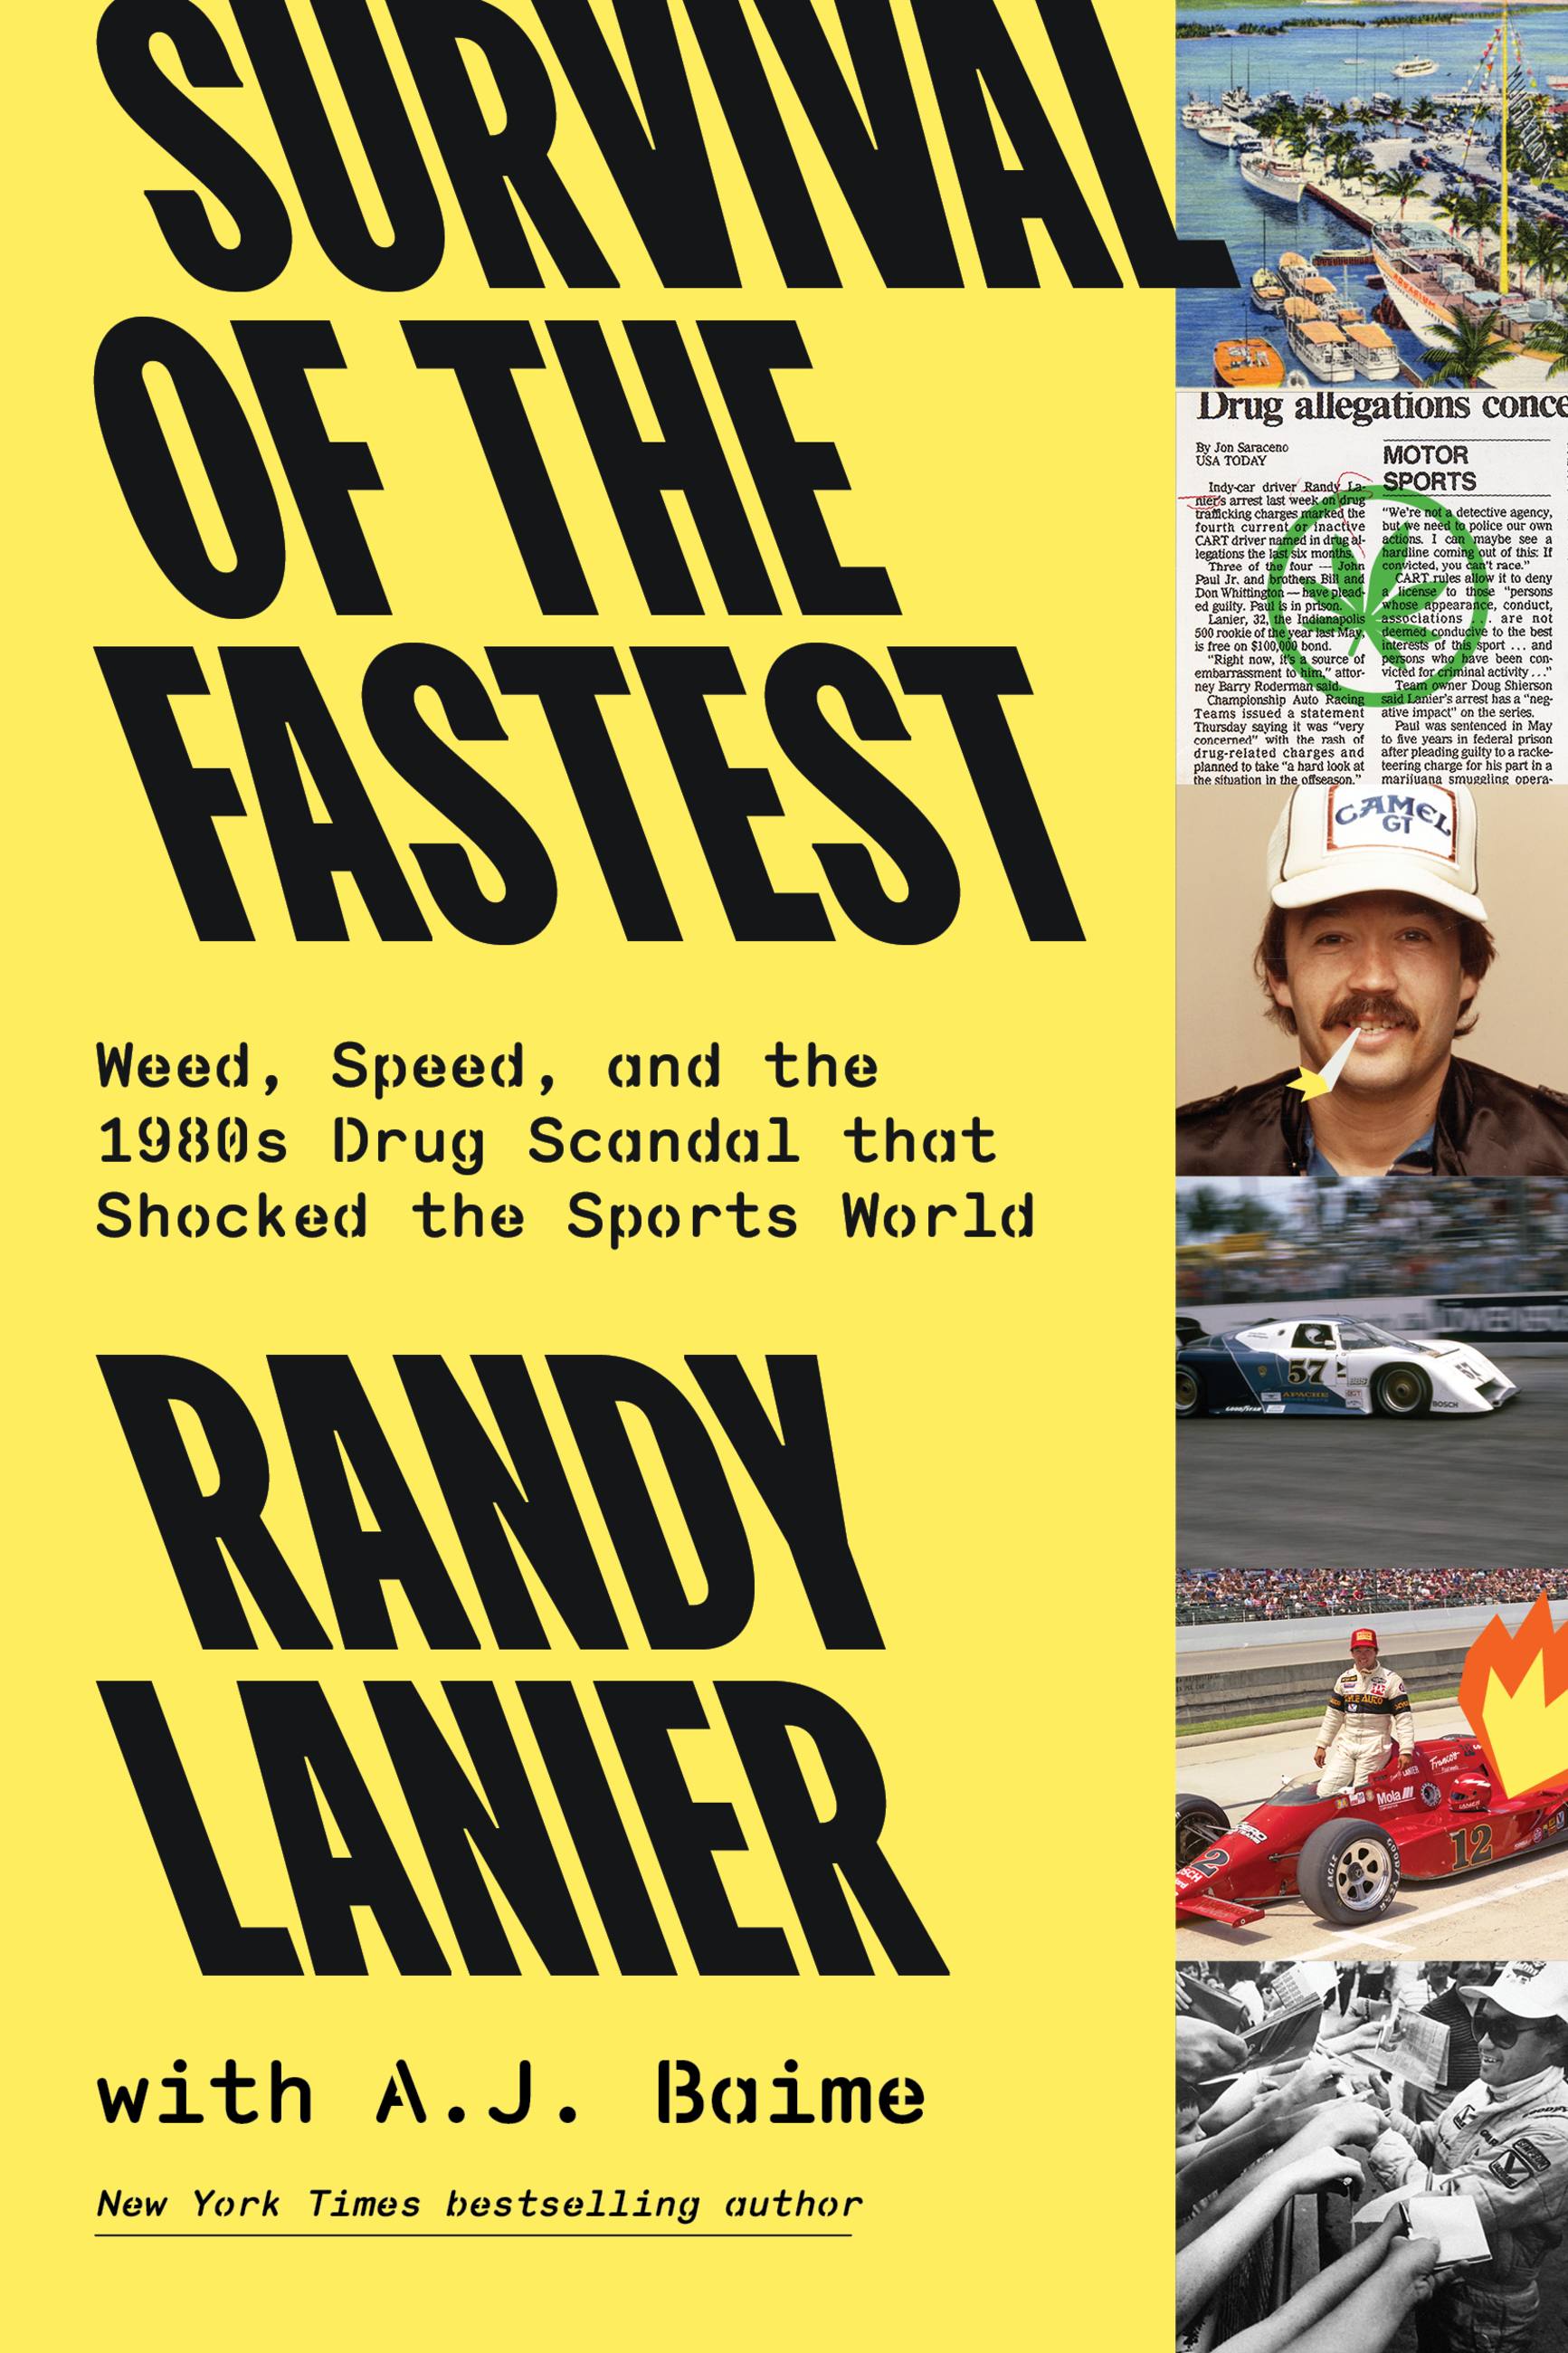 Survival of the Fastest by Randy Lanier